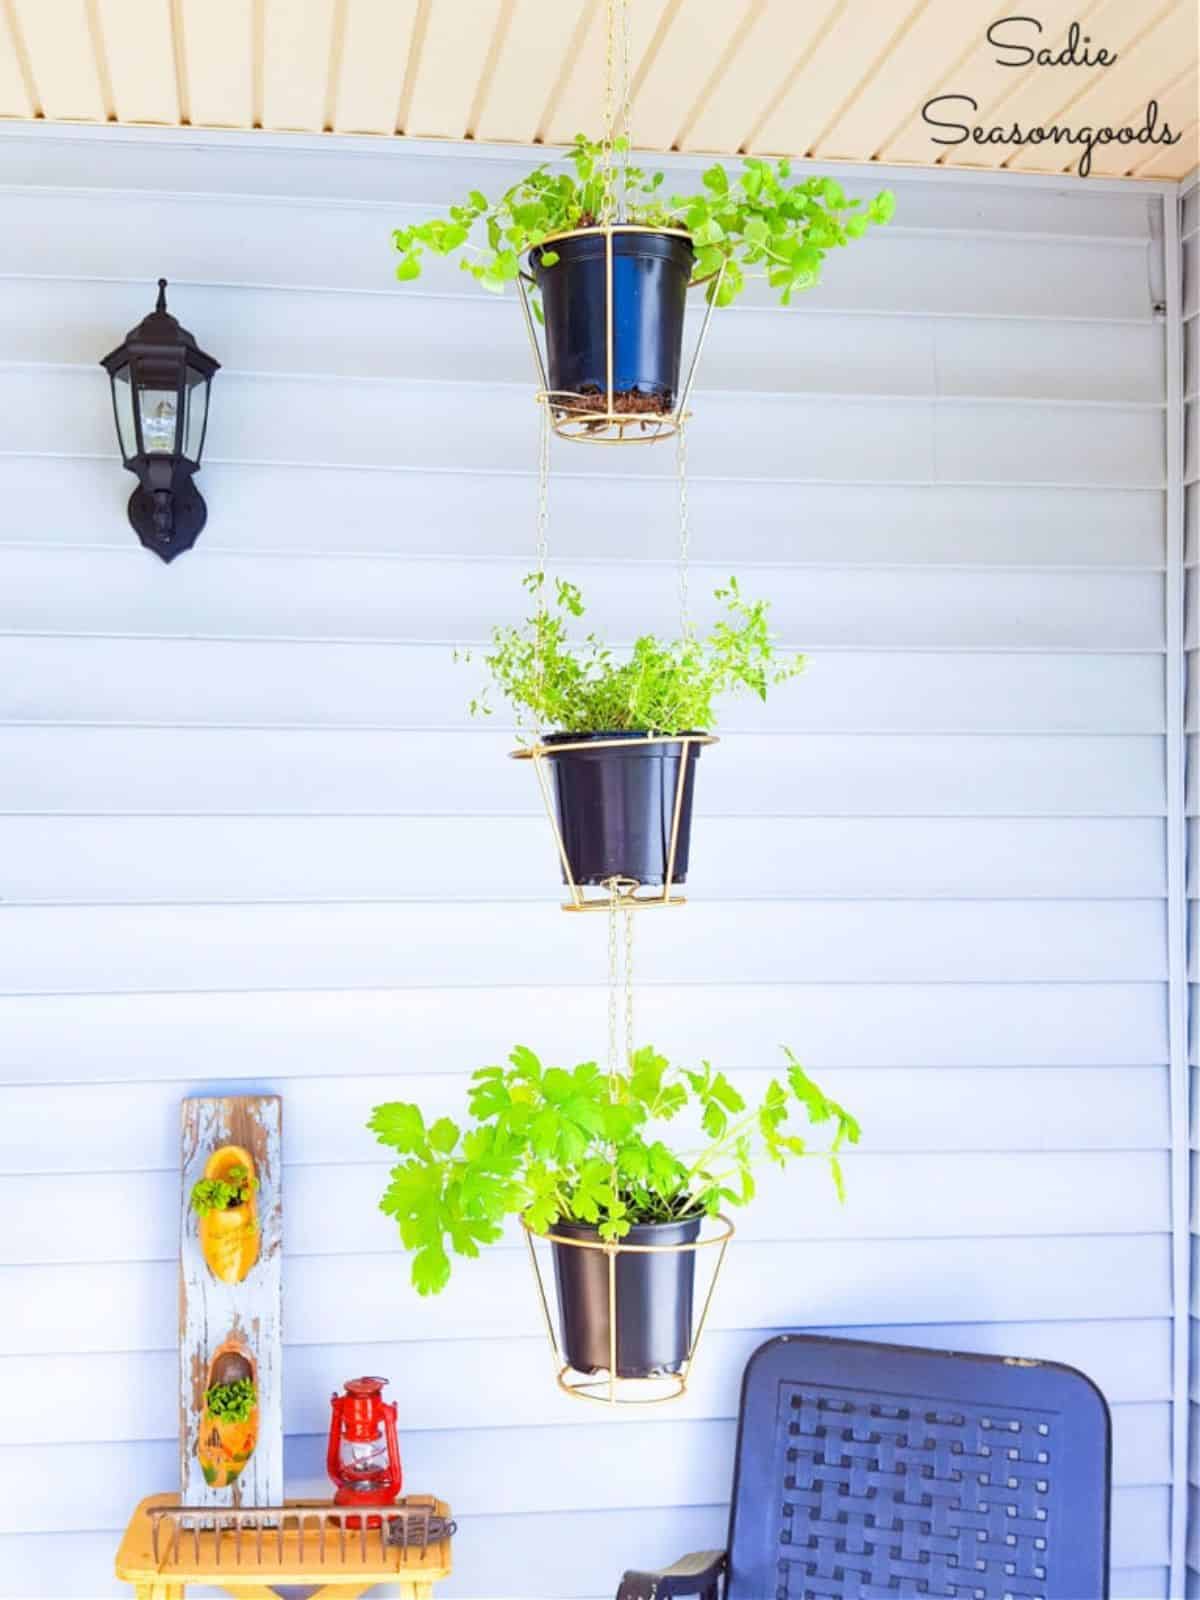 Lampshades as Hanging Herb Baskets